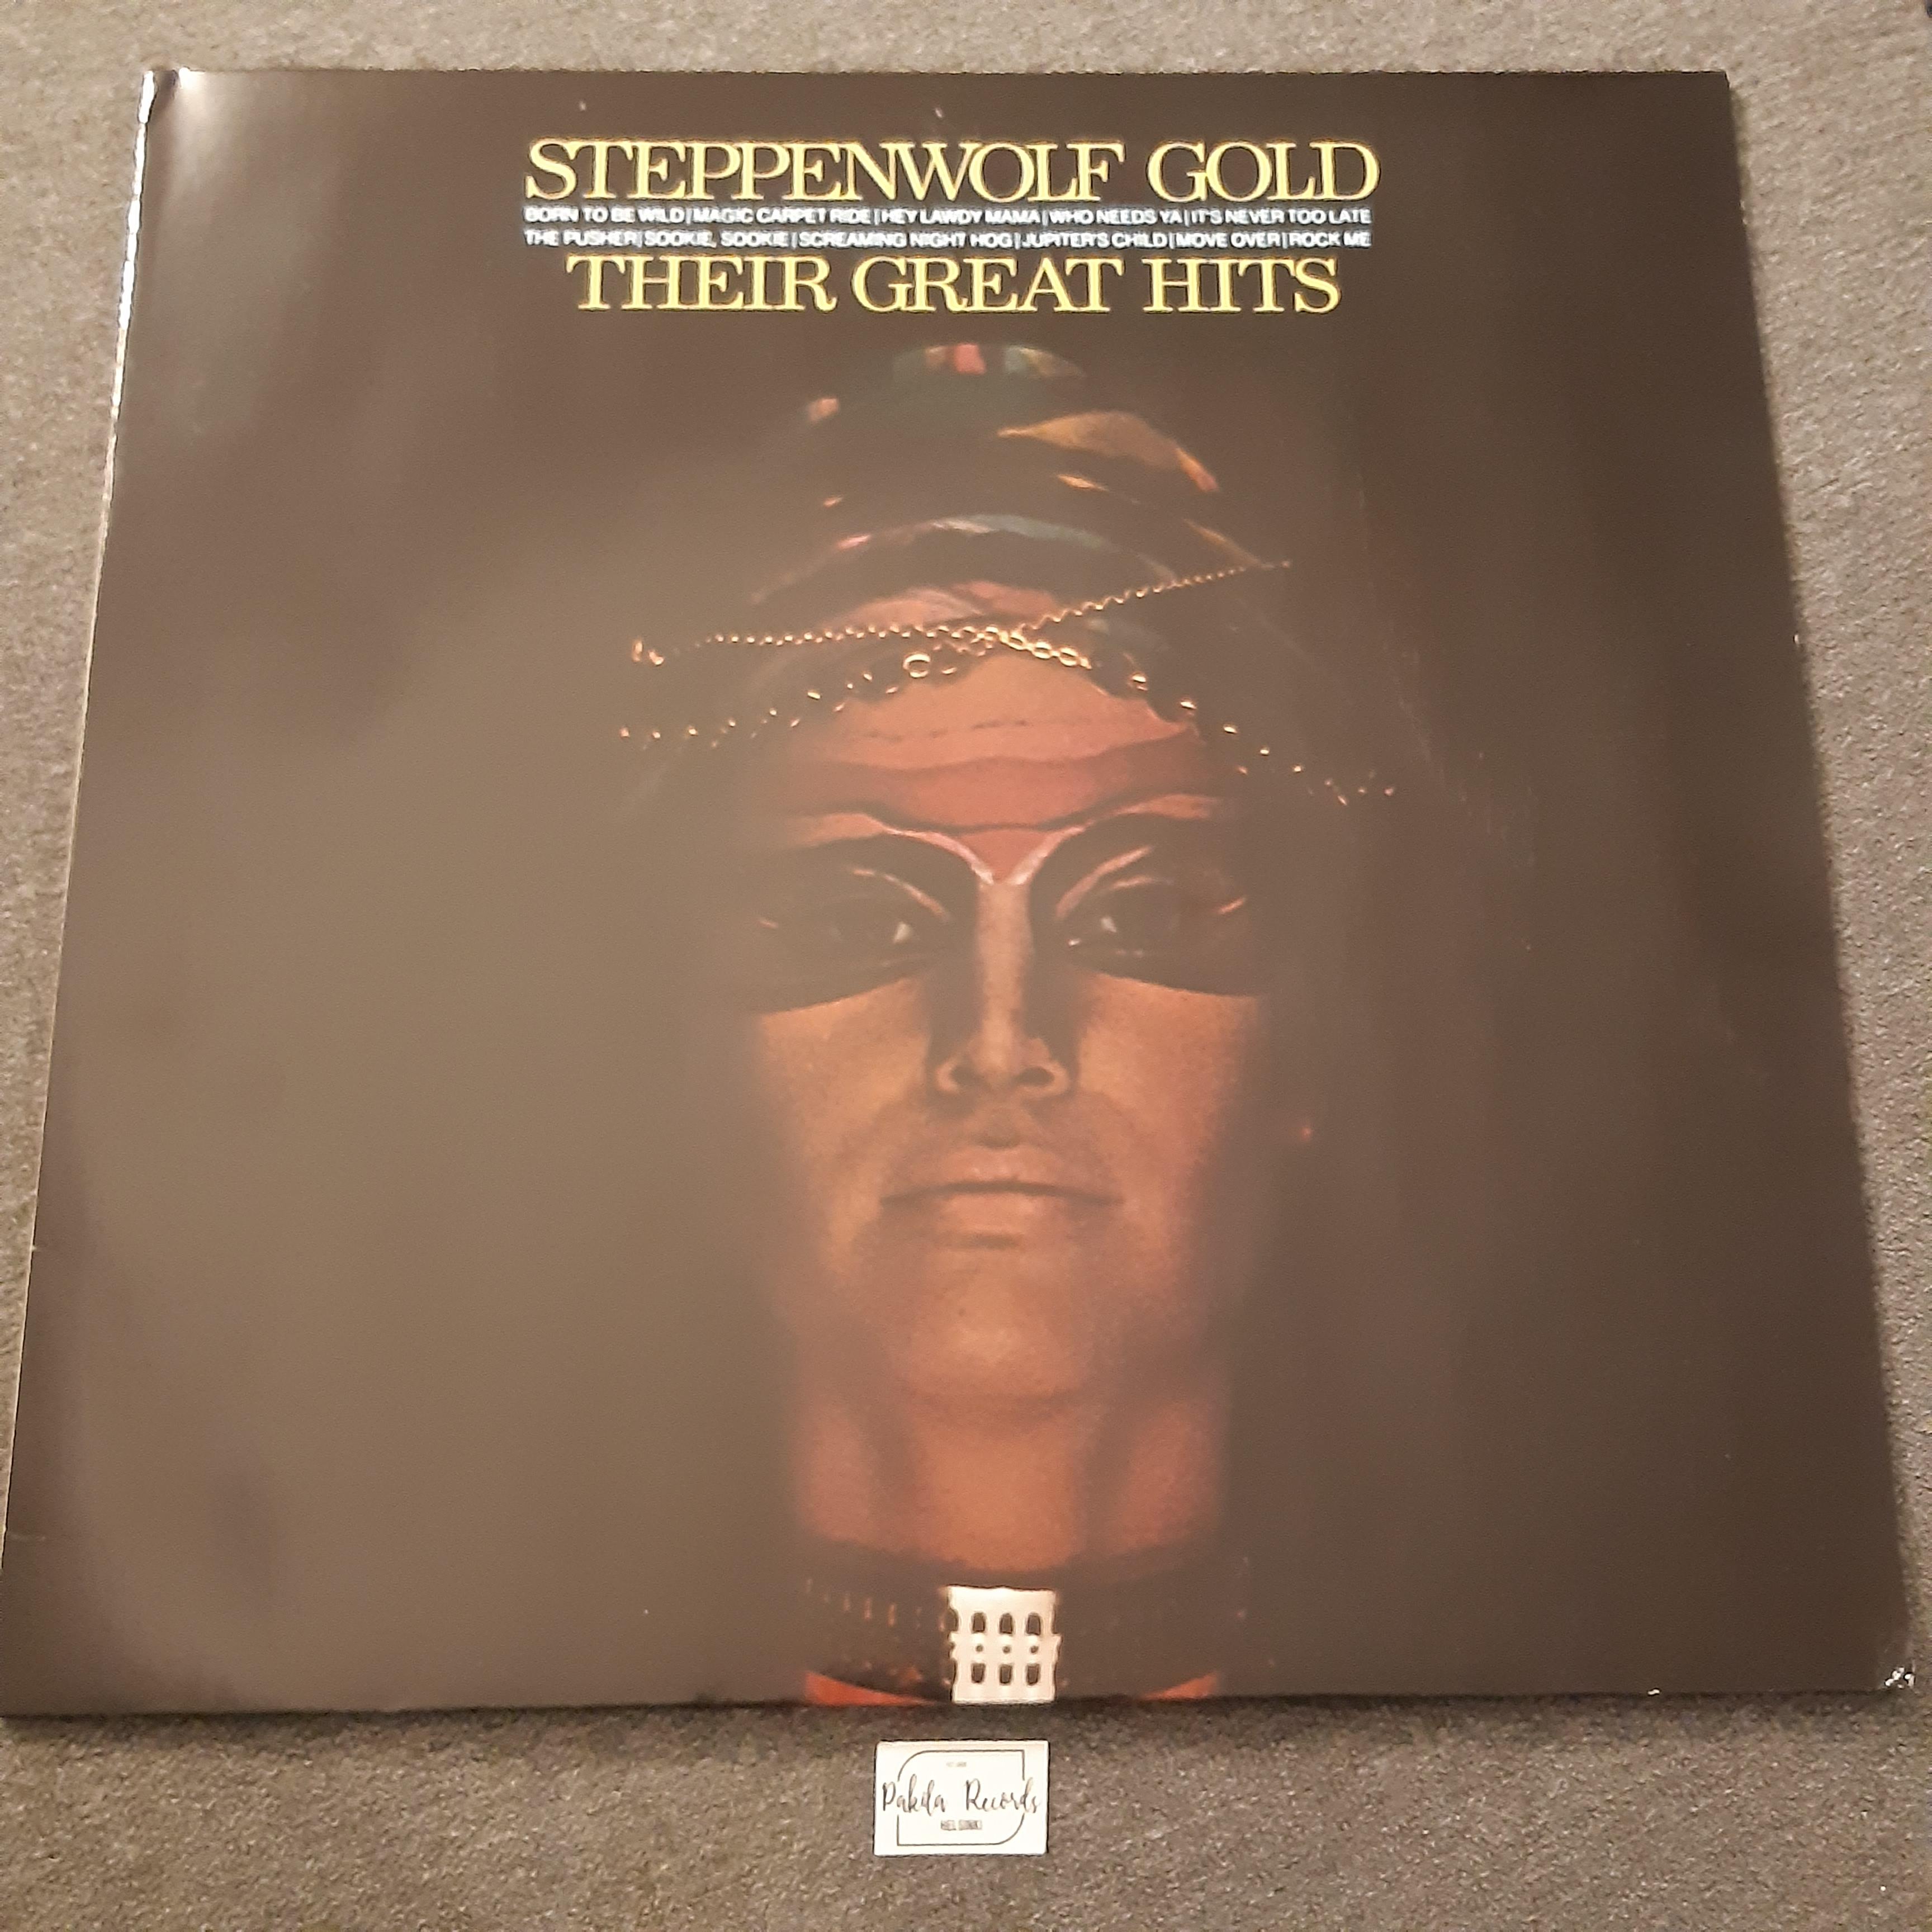 Steppenwolf - Gold (Their Great Hits) - LP (käytetty)